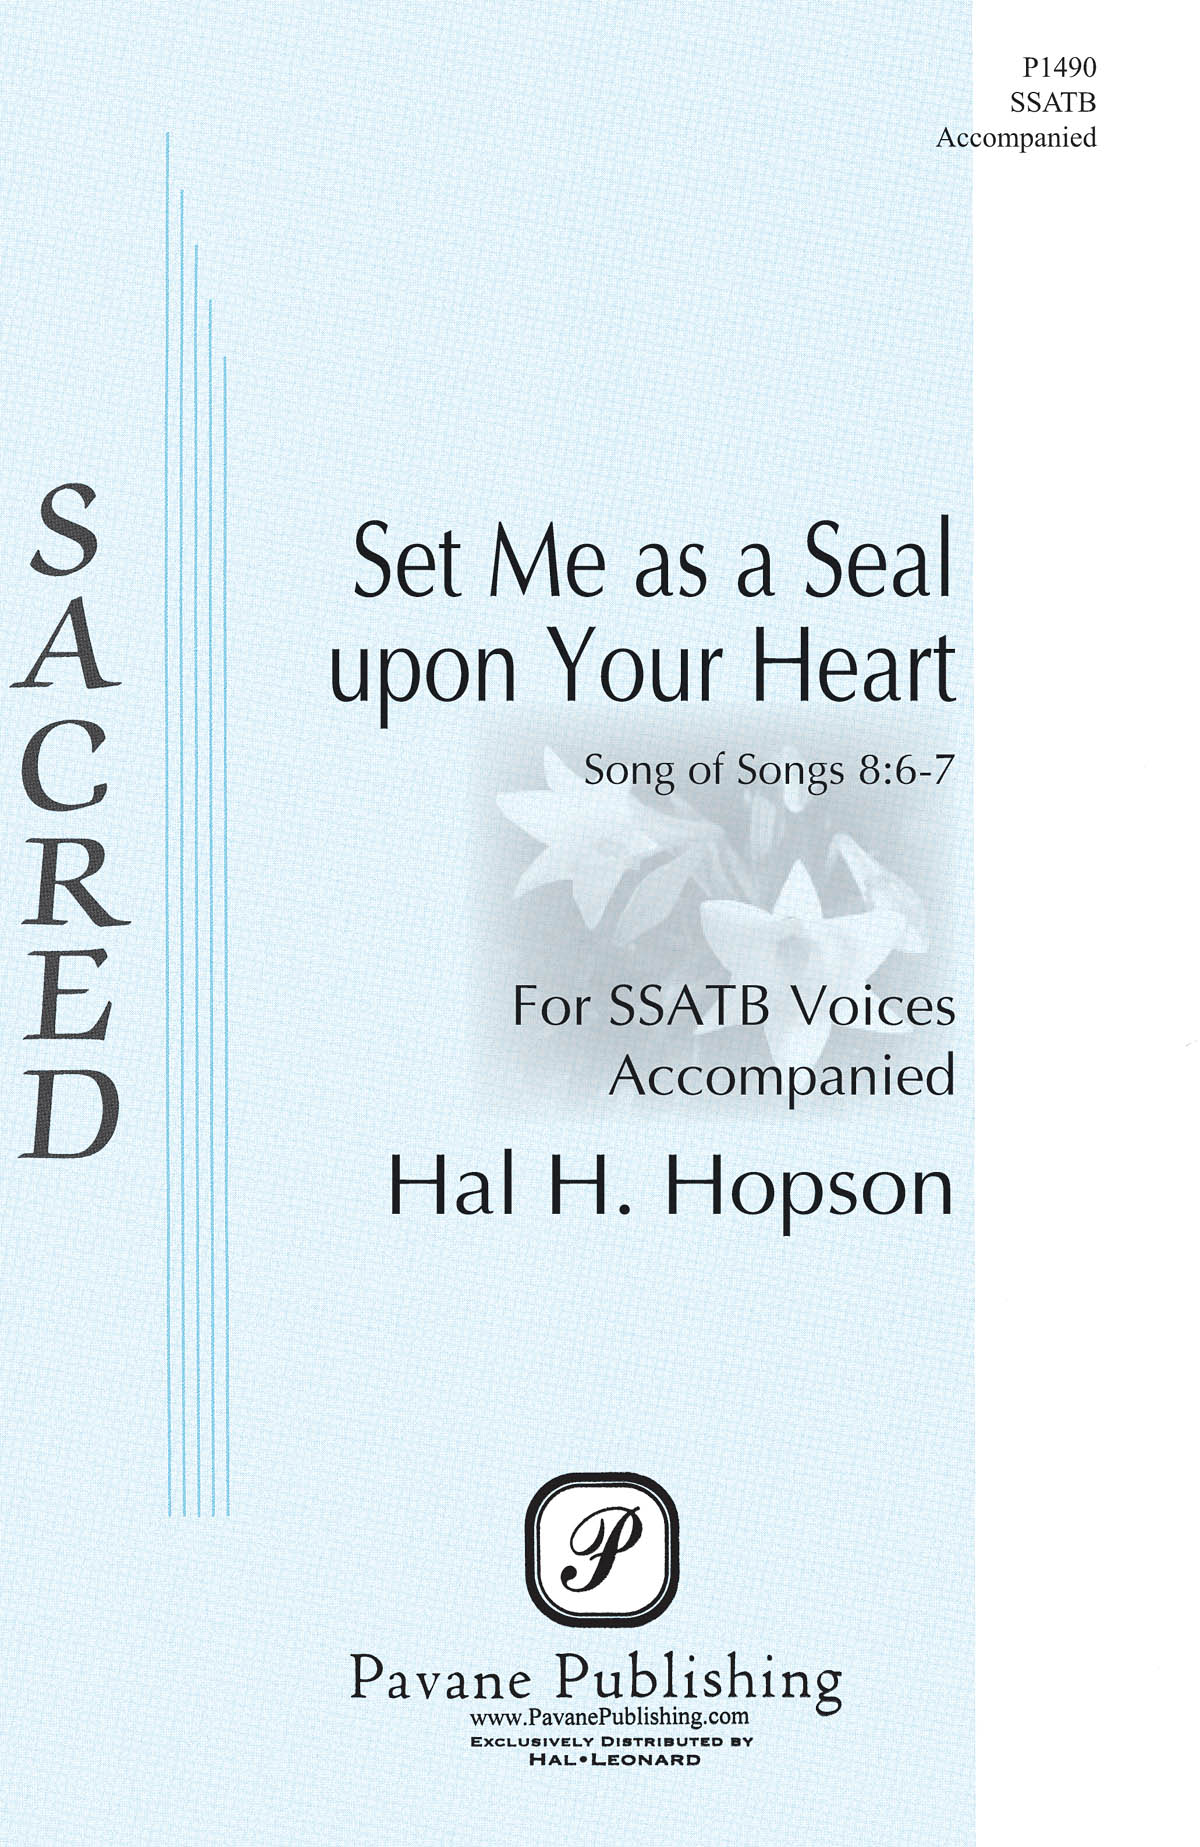 Hal H. Hopson: Set Me as a Seal upon Your Heart: Mixed Choir a Cappella: Vocal